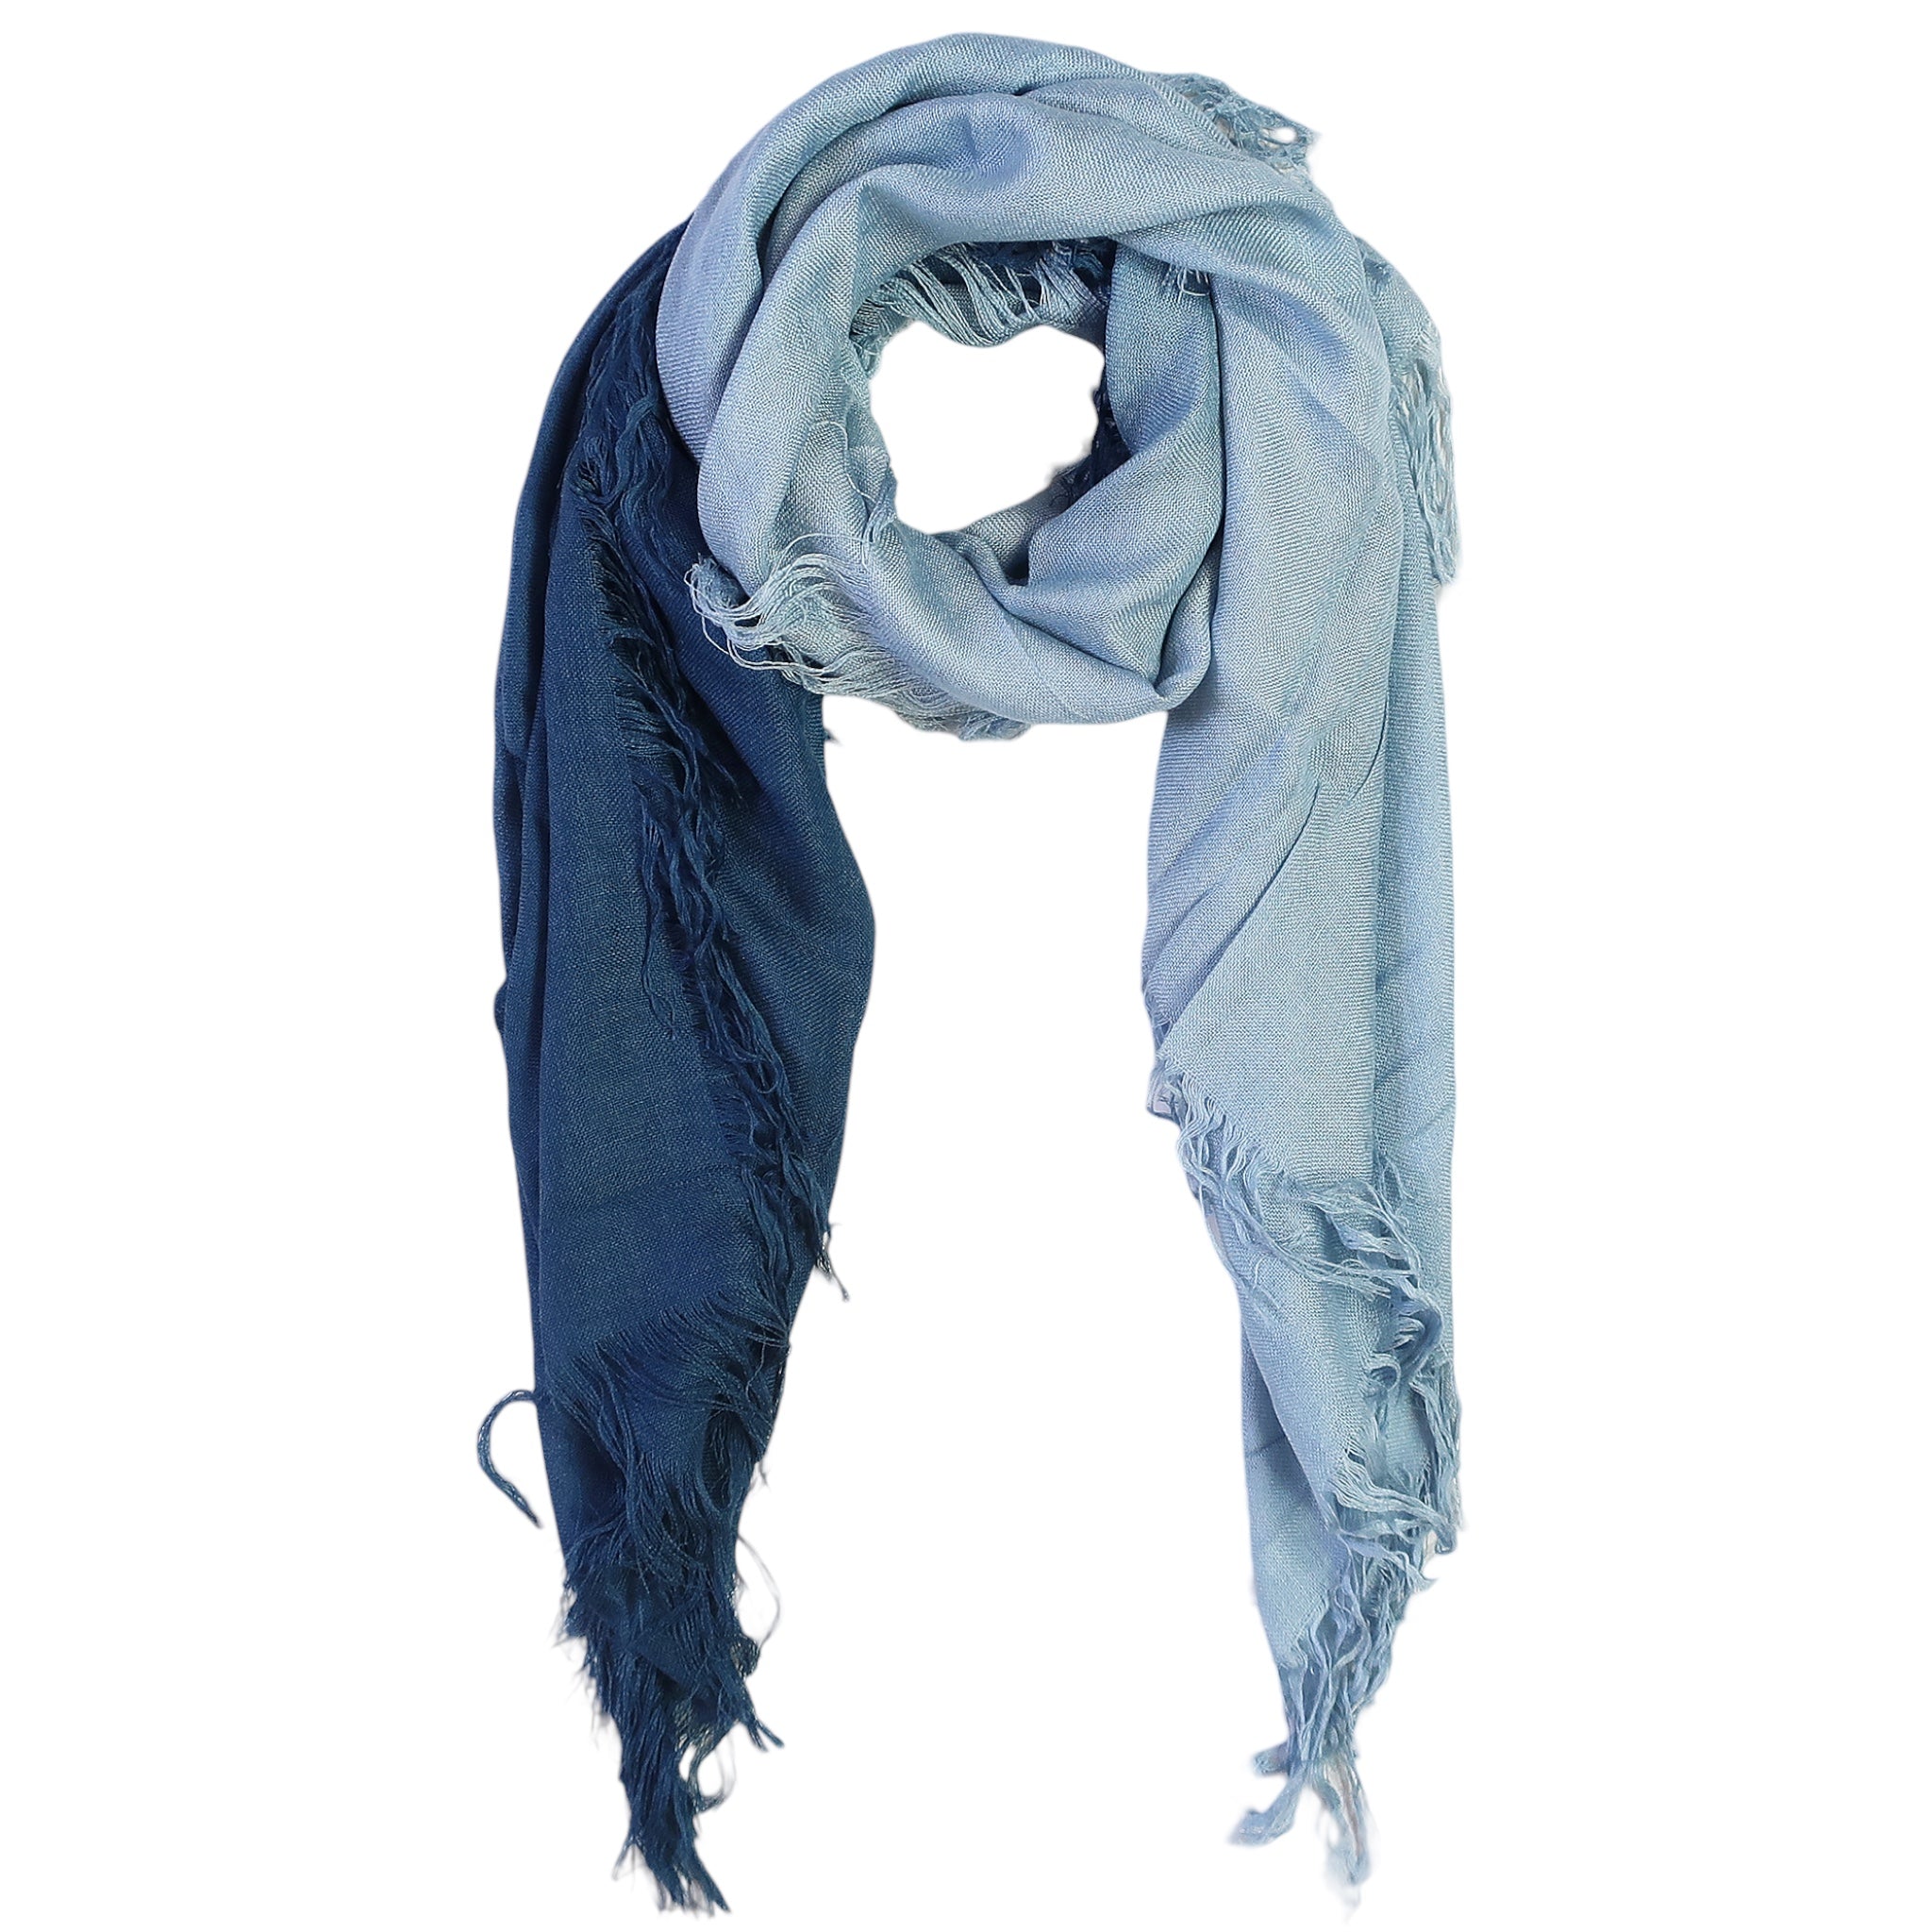 Blue Pacific Tissue Solid Micromodal Cashmere Scarf in Blueberry Denim 28 x 60